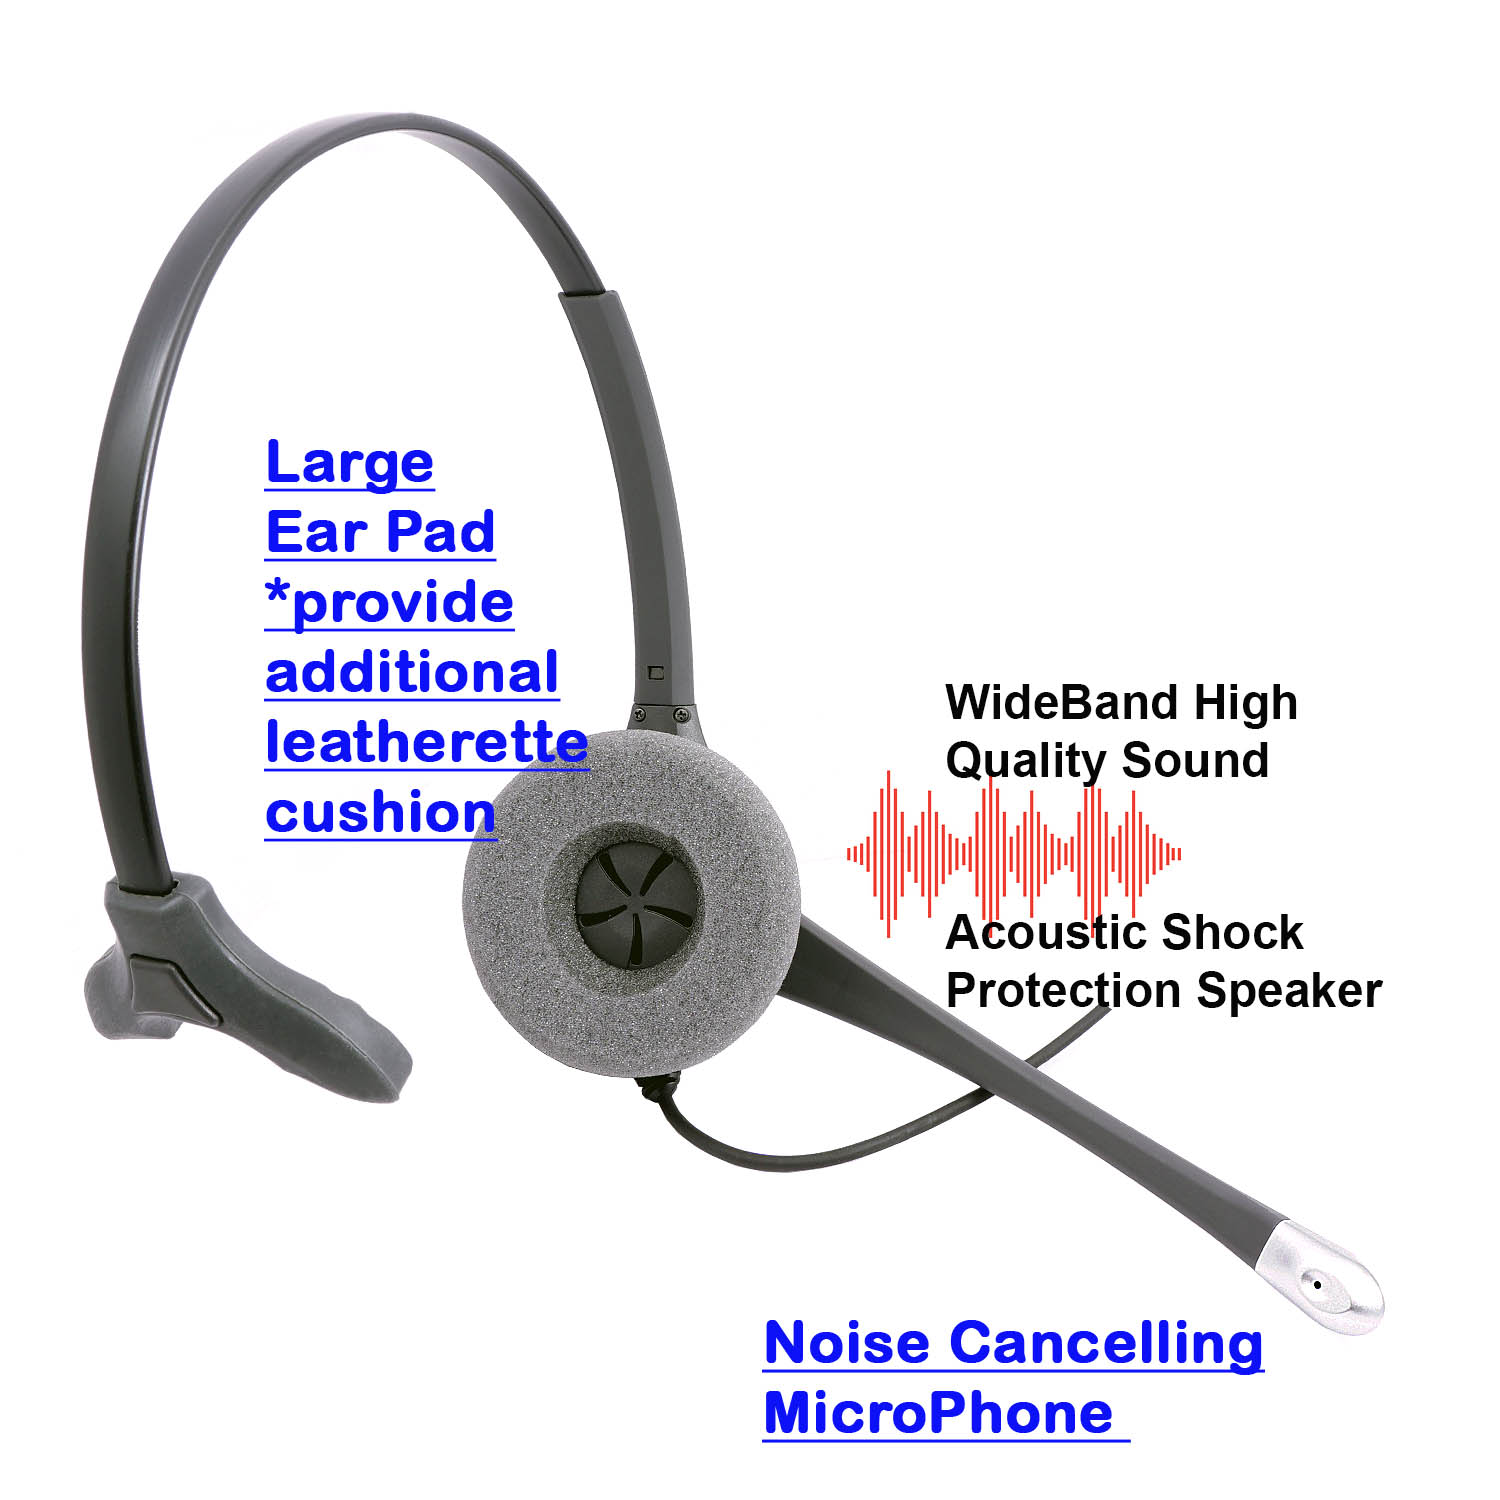 2.5mm Monaural Headset + 2.5 mm Headset Plug Combo for Desk Phone as Office Headset - image 4 of 7